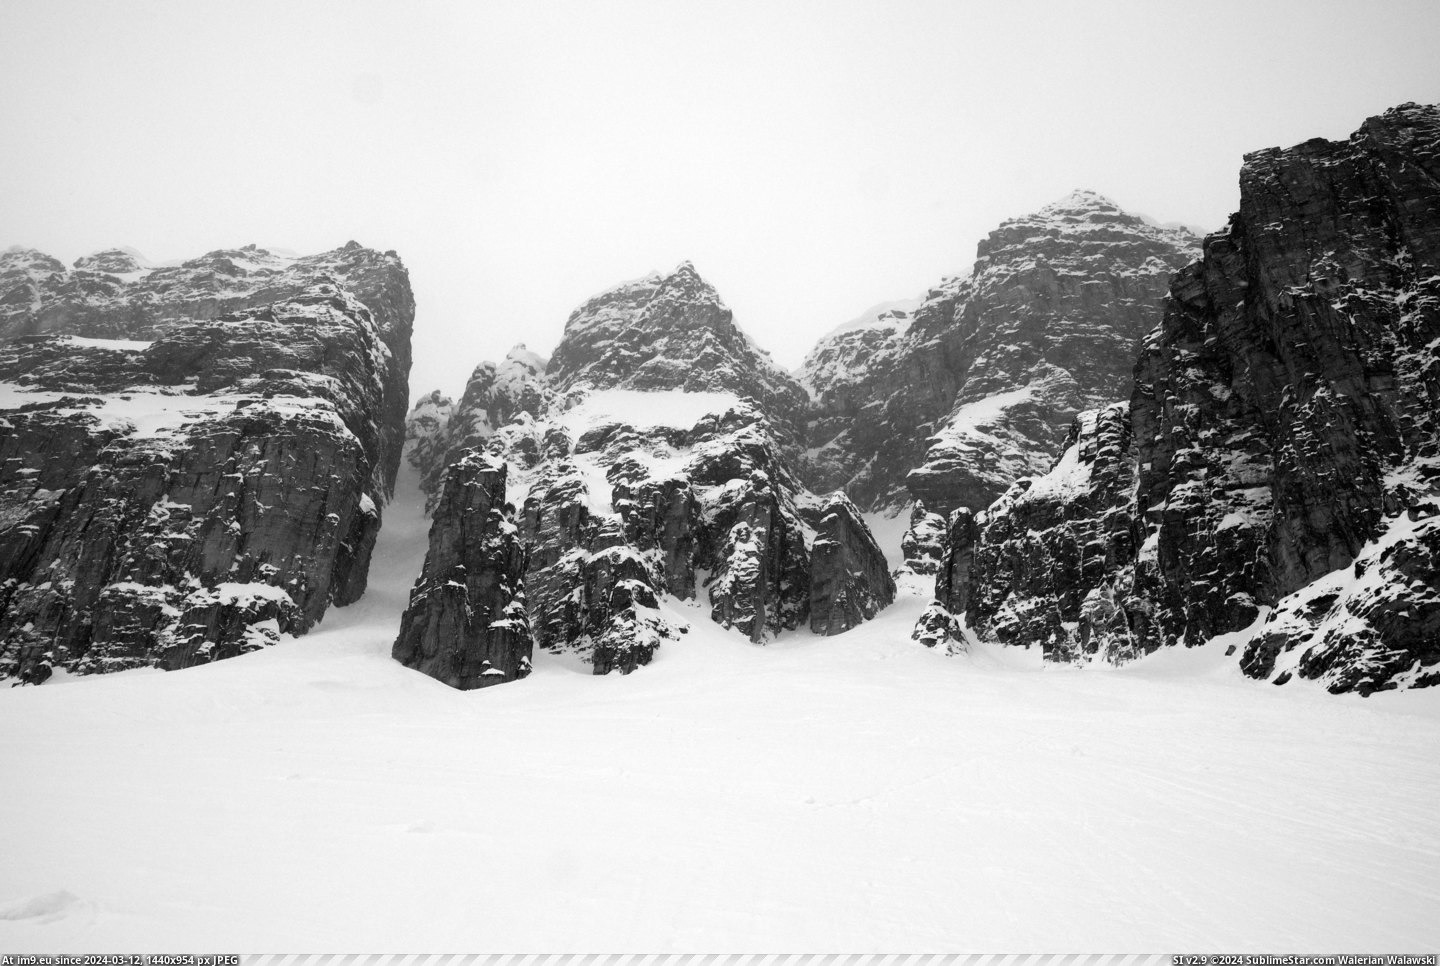 #Black #Photos #Daddy #Case #Rarely #White #Grand [Earthporn] I rarely see black and white photos here, but in this case I think it's appropriate. The Grand Daddy Couloir in Banf Pic. (Obraz z album My r/EARTHPORN favs))